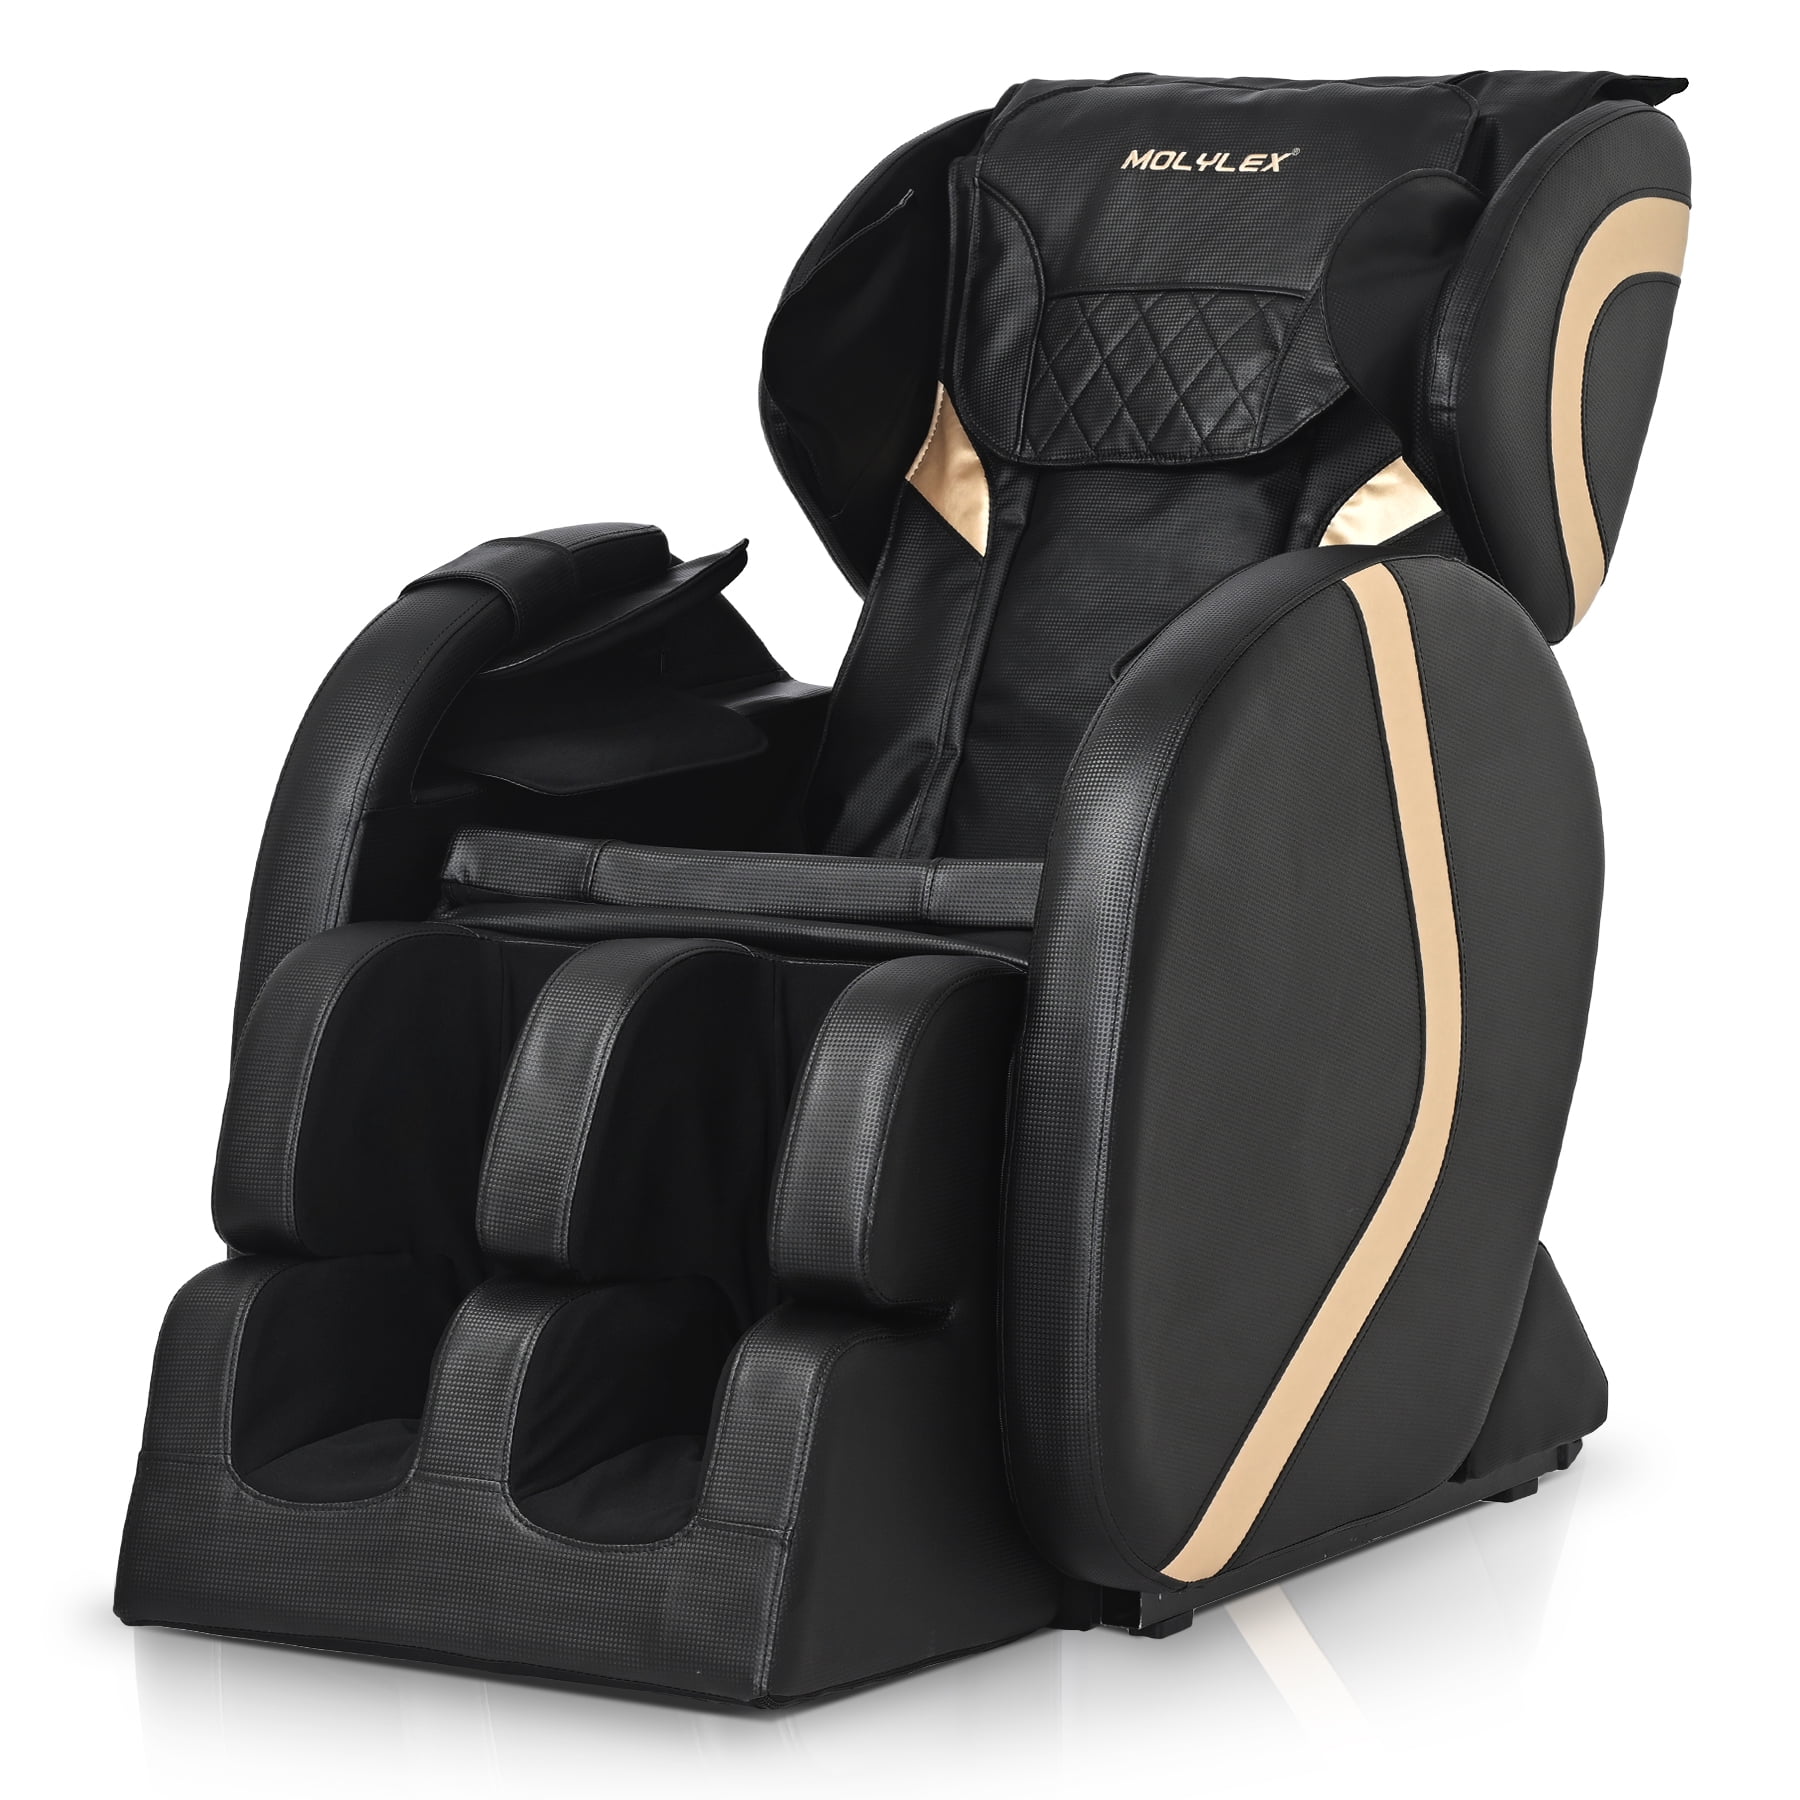 Top 5 Best Car Seat Massagers Review in 2023